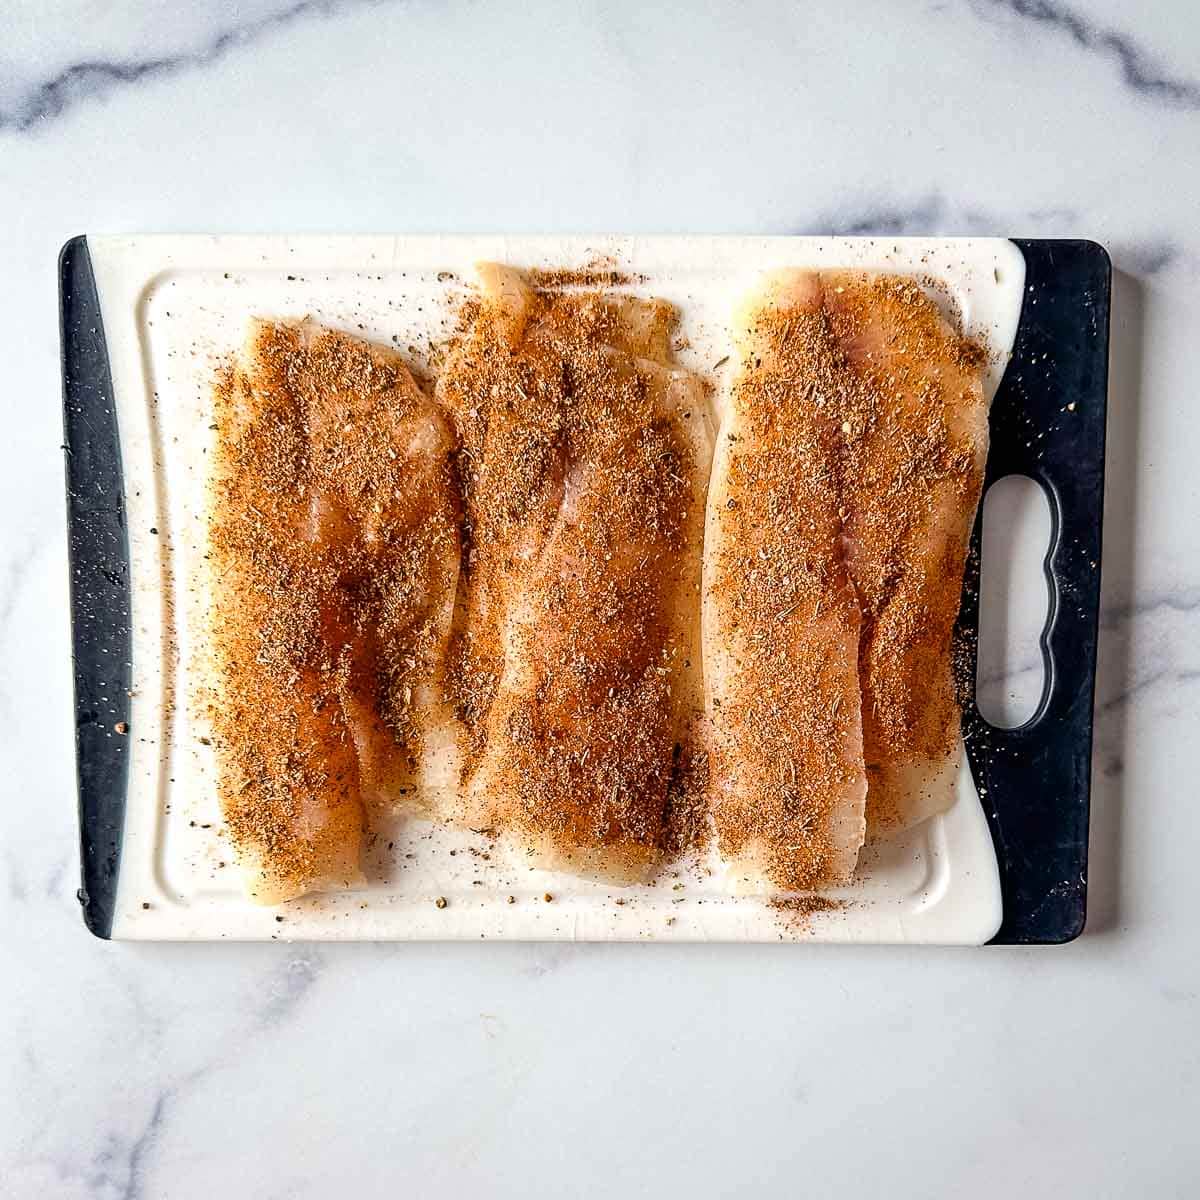 Fish fillets coated with blackening spice.